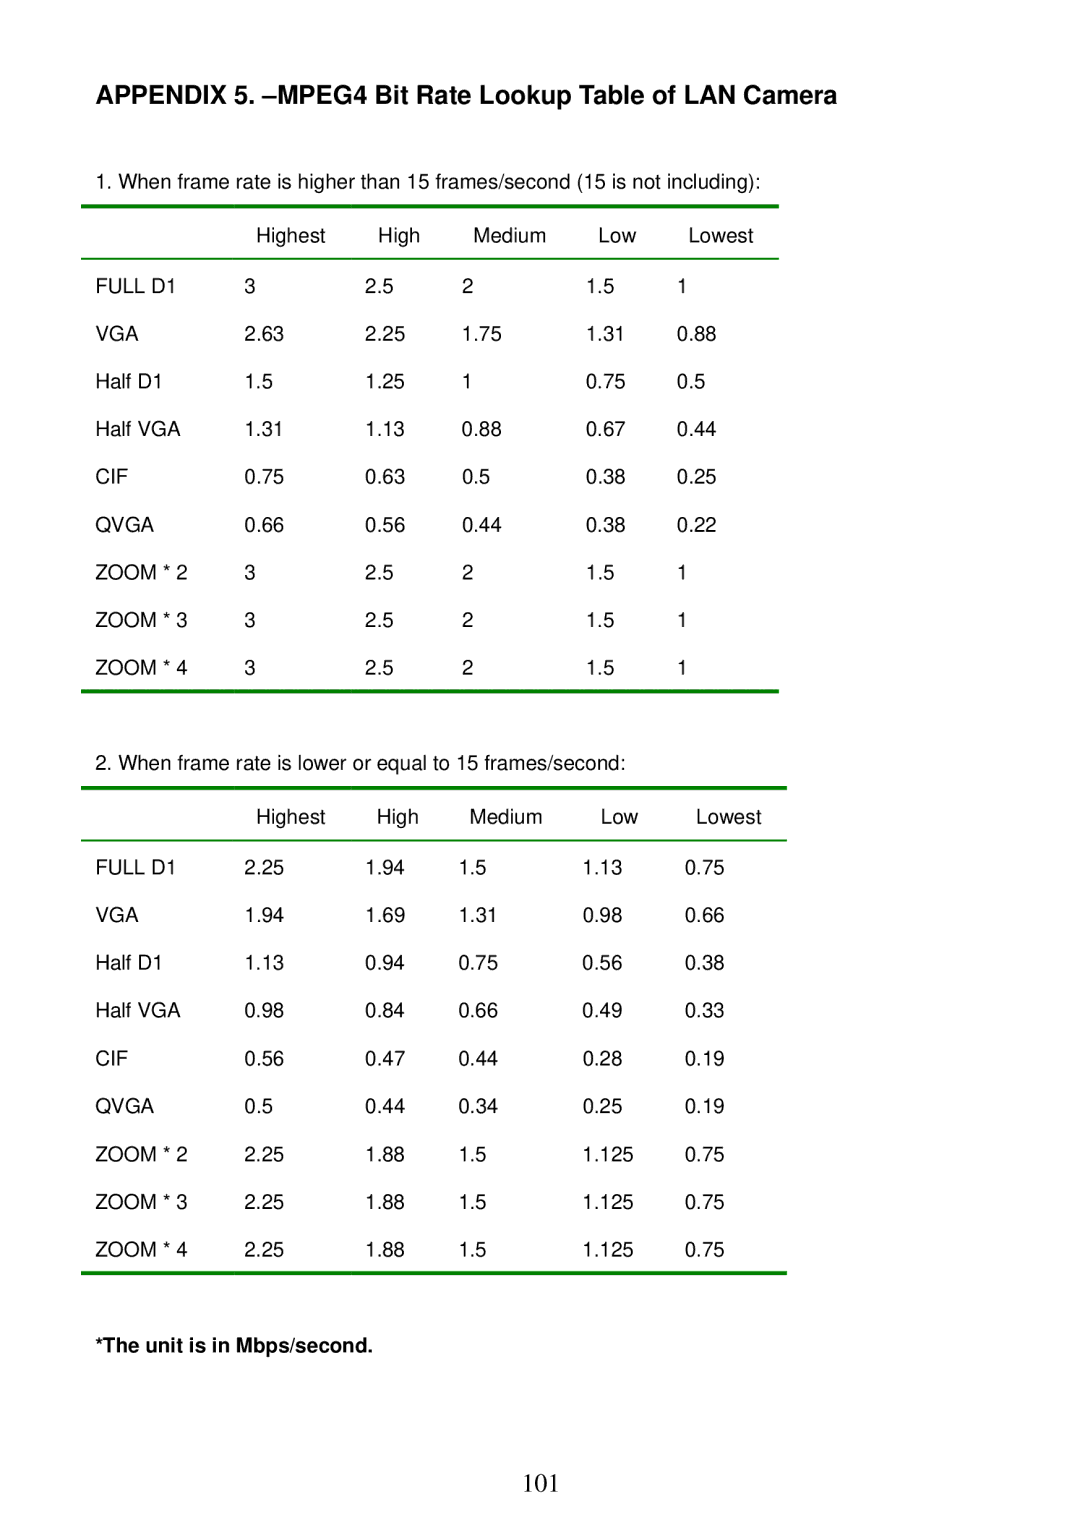 Sony MPEG4 LAN Camera operation manual Appendix 5. -MPEG4 Bit Rate Lookup Table of LAN Camera, Unit is in Mbps/second 